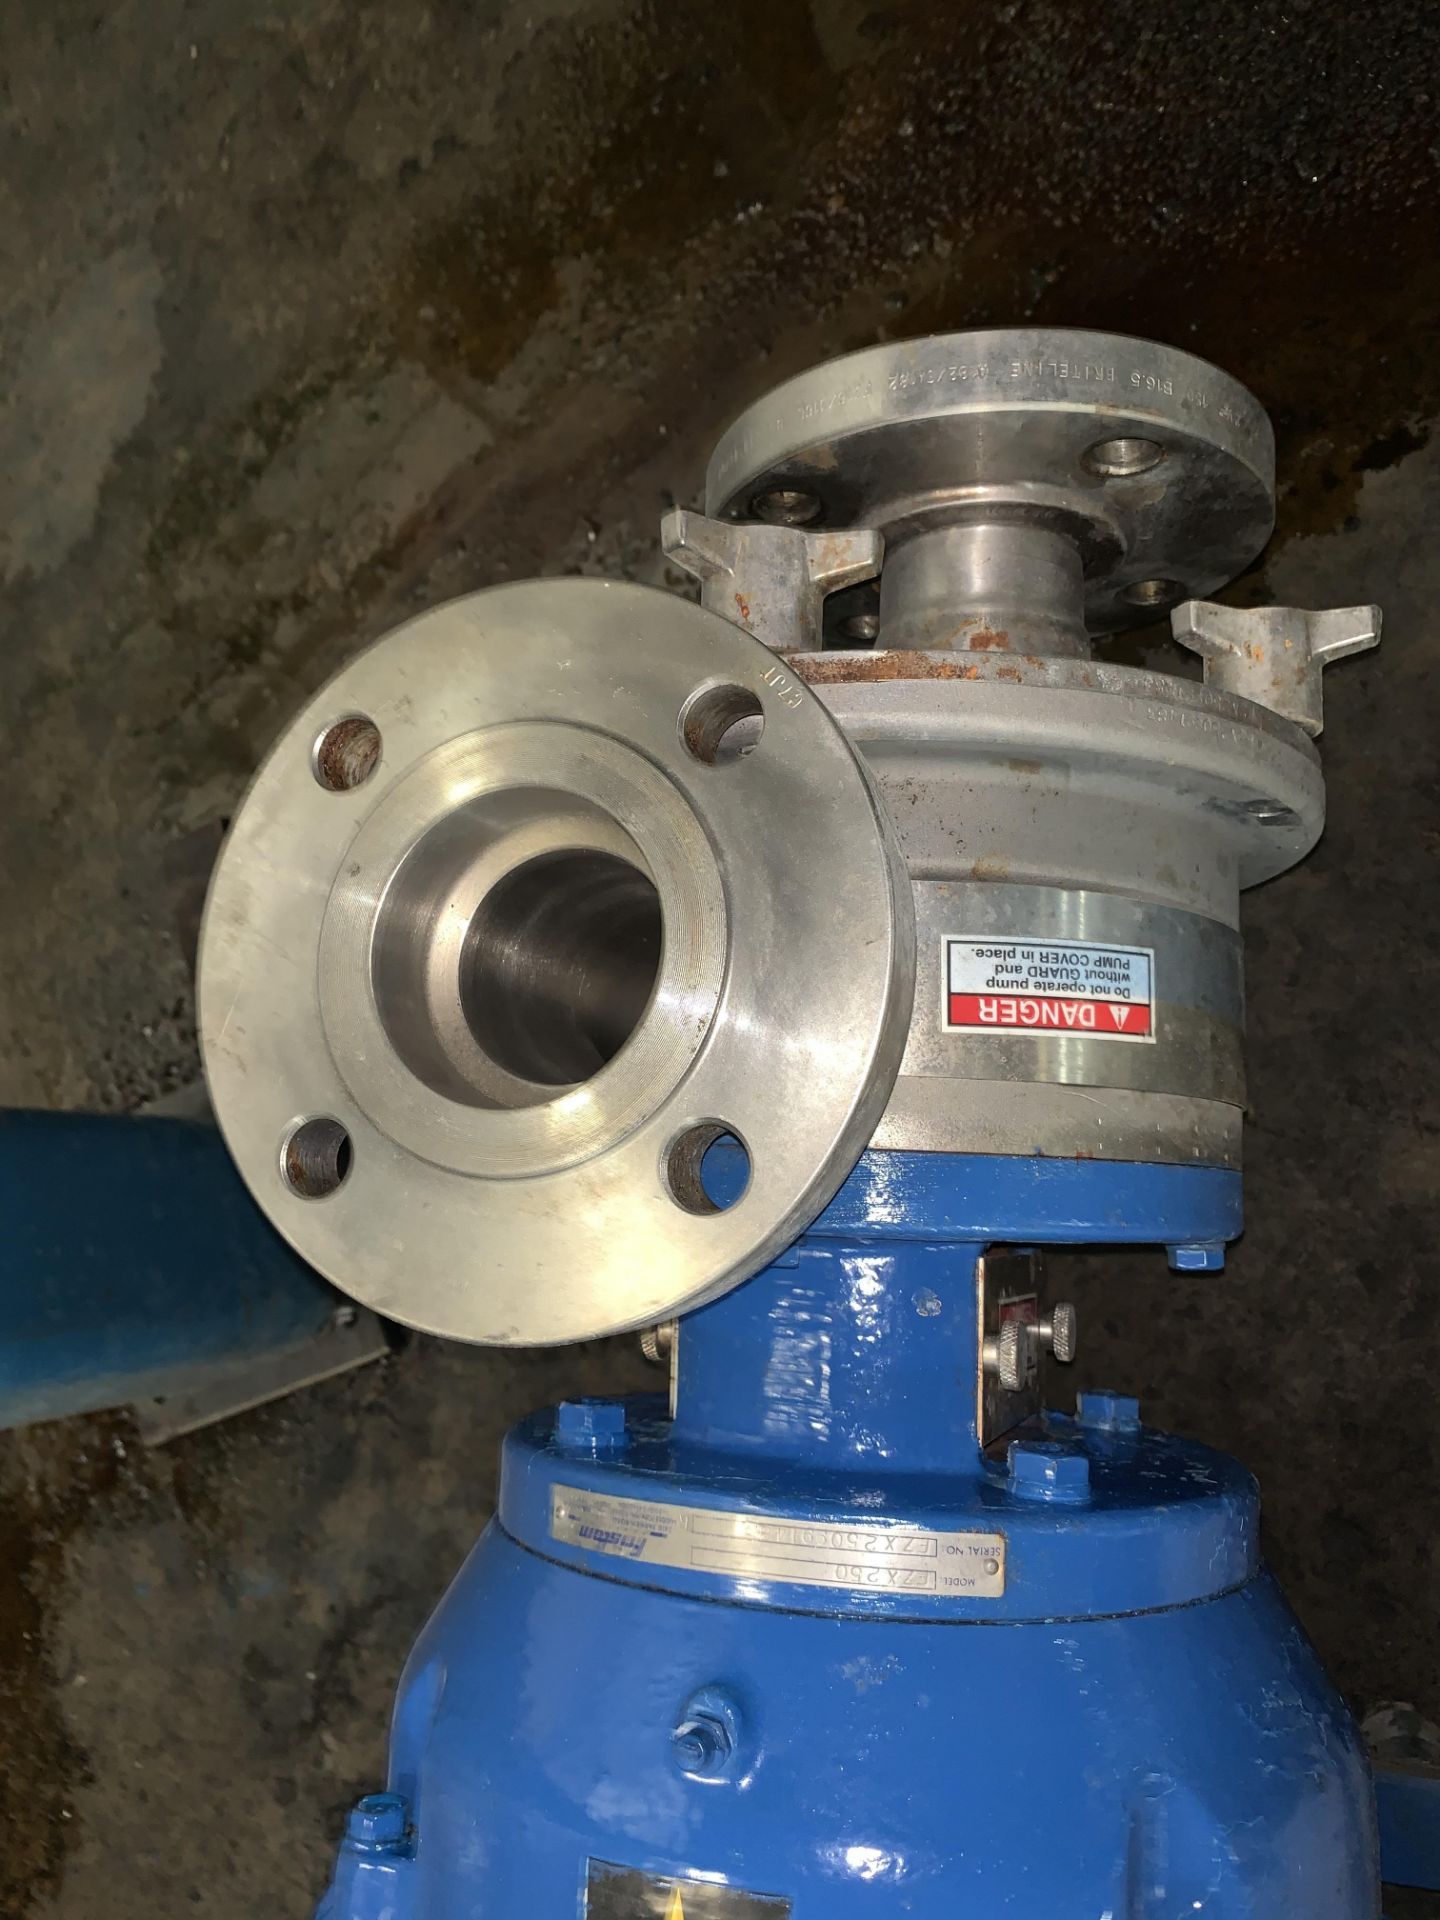 Frisam Stainless Steel Pump with super efficient Baldor 15HP motor rated at two speeds of 1750 and - Bild 4 aus 8